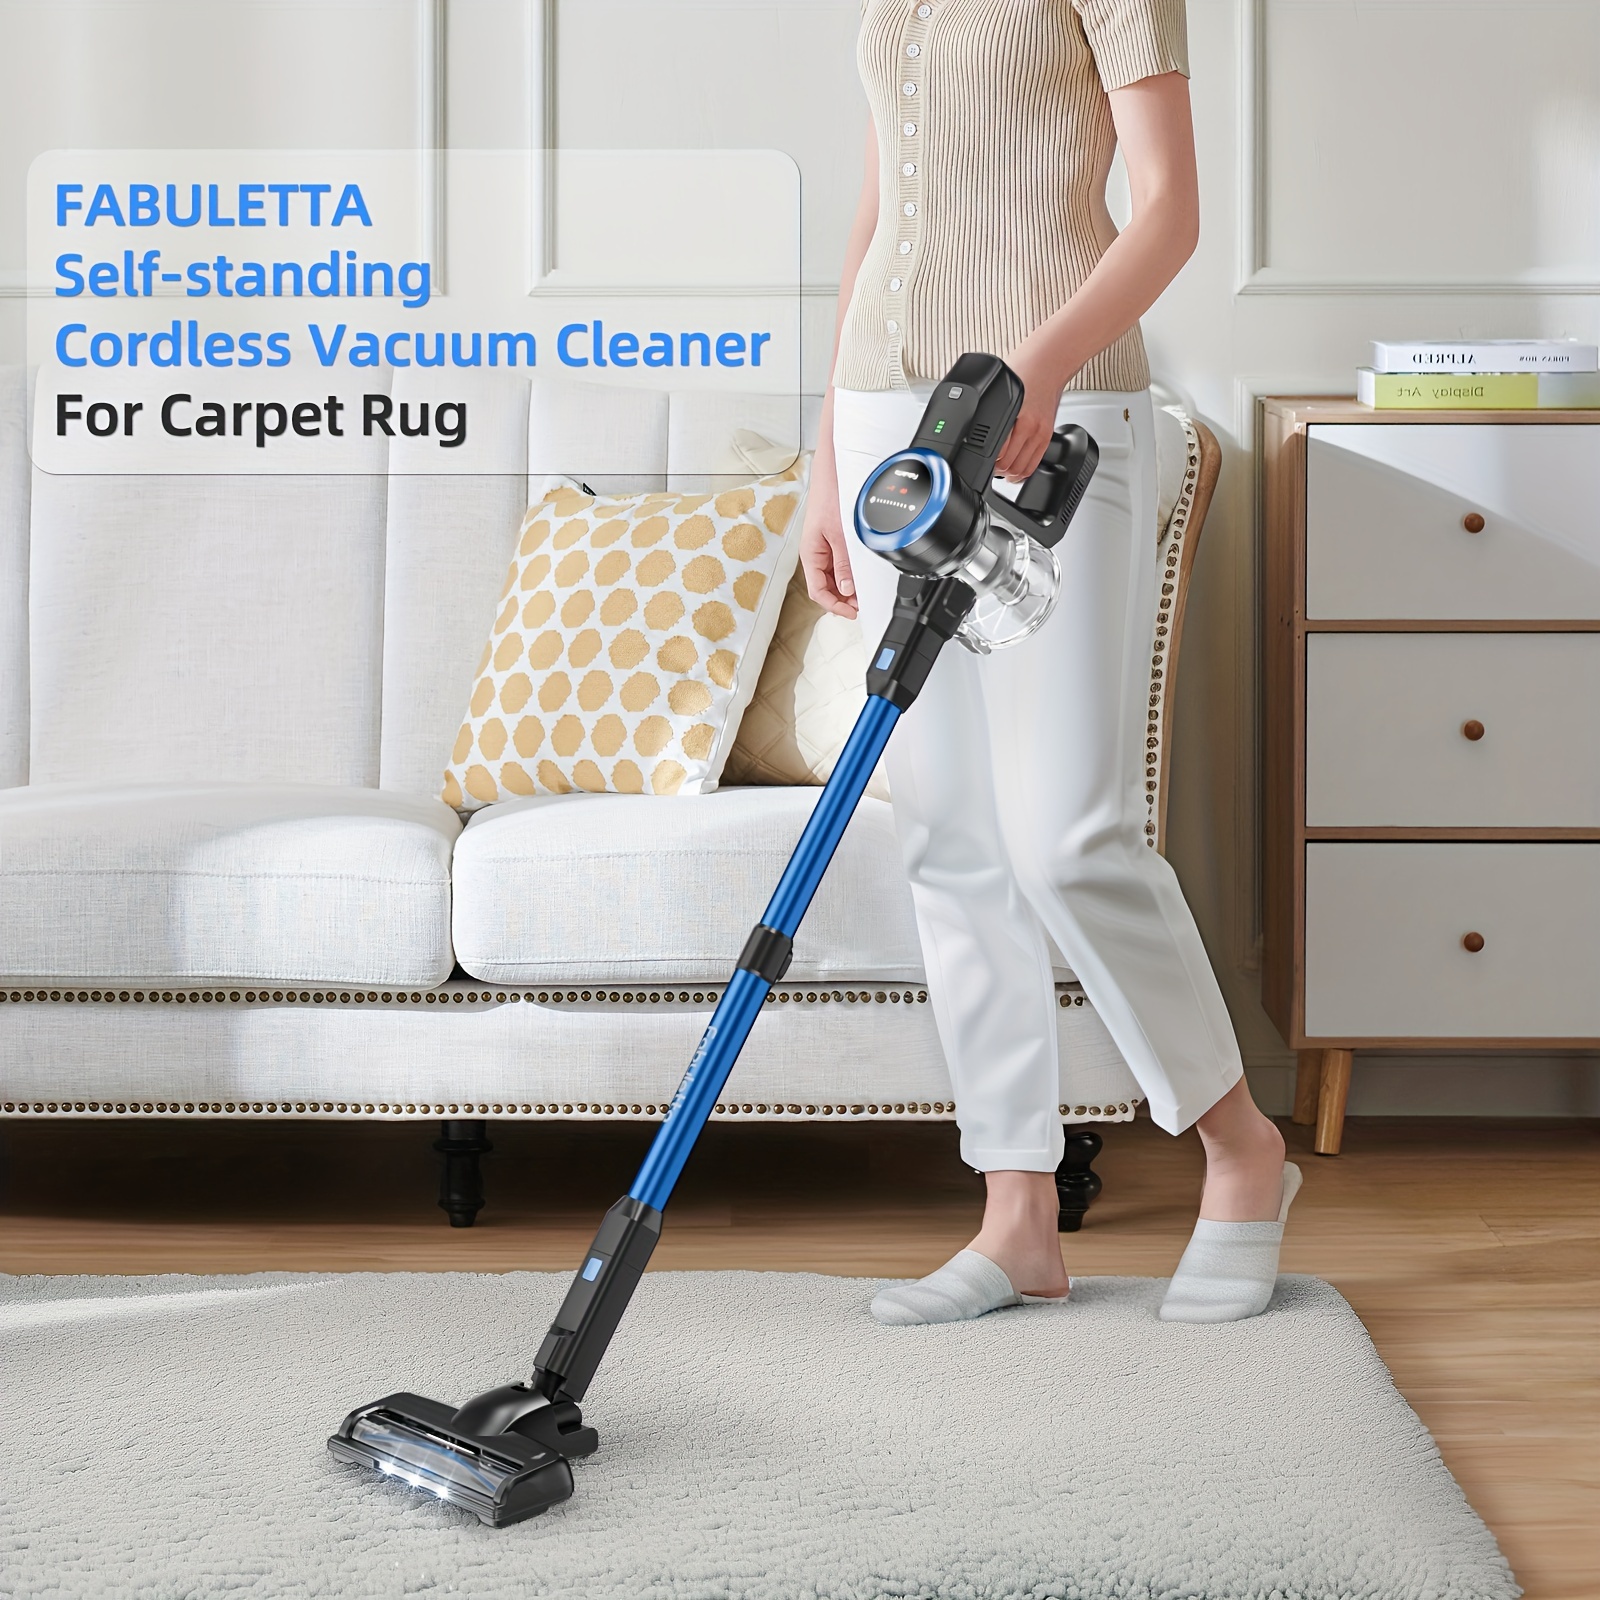 

Fabuletta Cordless Vacuum Cleaner, 24kpa Powerful Suction Stick Vacuum Cleaner With 250w Brushless Motor, Led Display, 6 In 1 Lightweight Vacuum For Pet Hair Hard Floors Carpet, Up To 45min Runtime